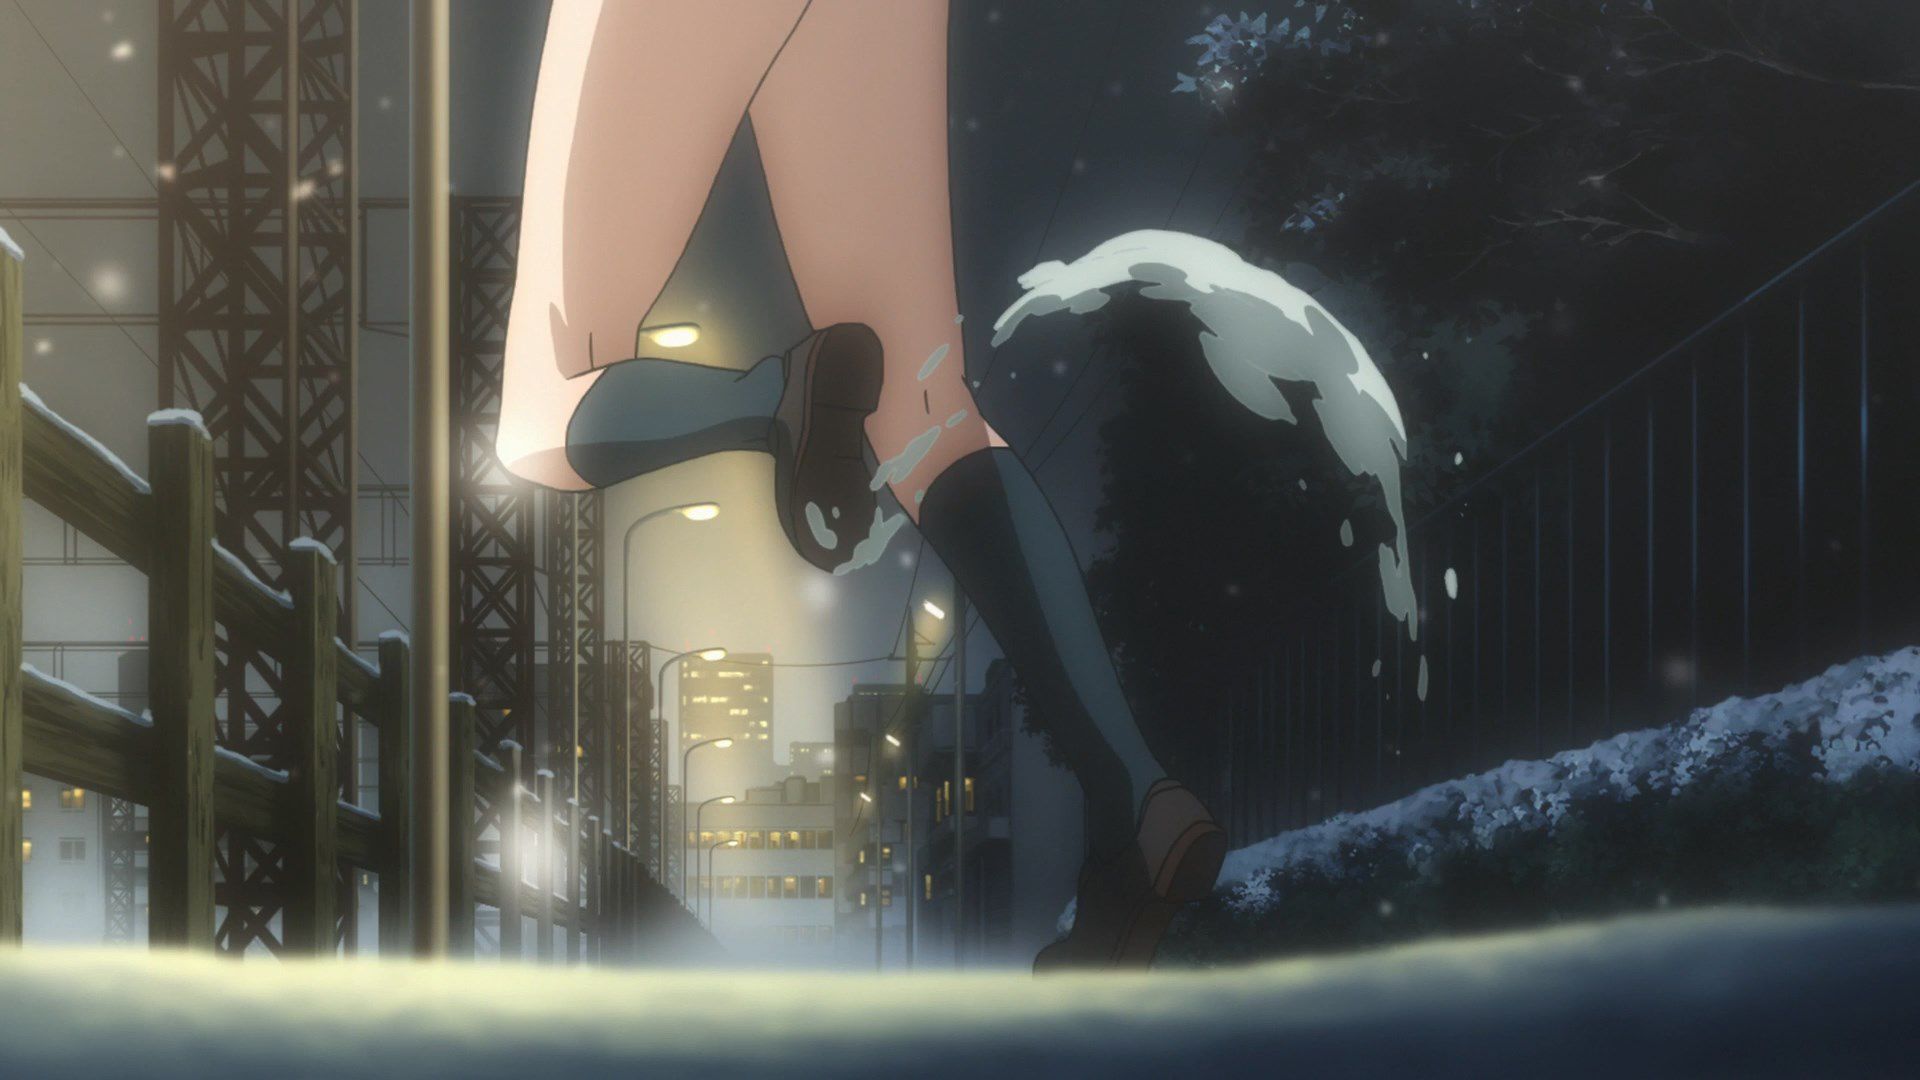 [God images] "love live! ' Μm ' PV's leg is too erotic everyone wakes up to a leg fetish of wwwww 8